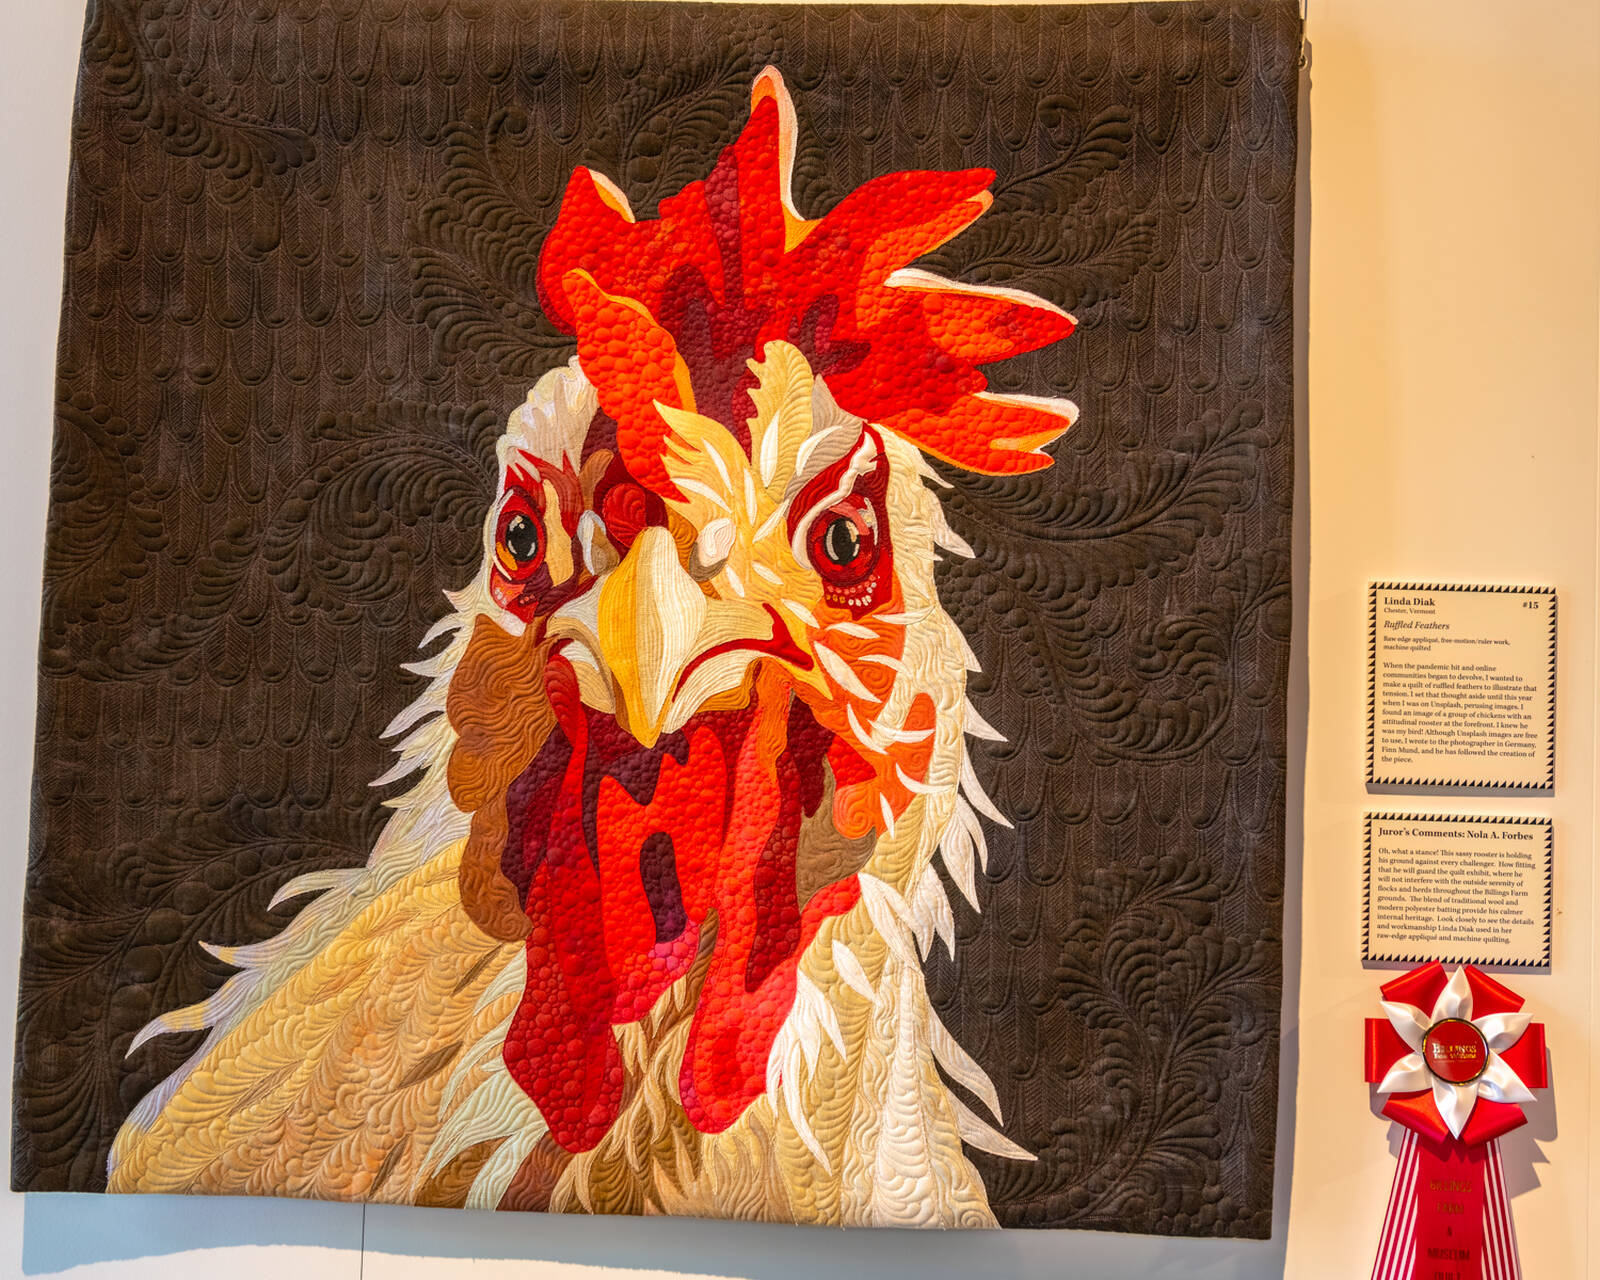 Image of Billings Farm & Museum Annual Quilt Show  by Wayne Foote